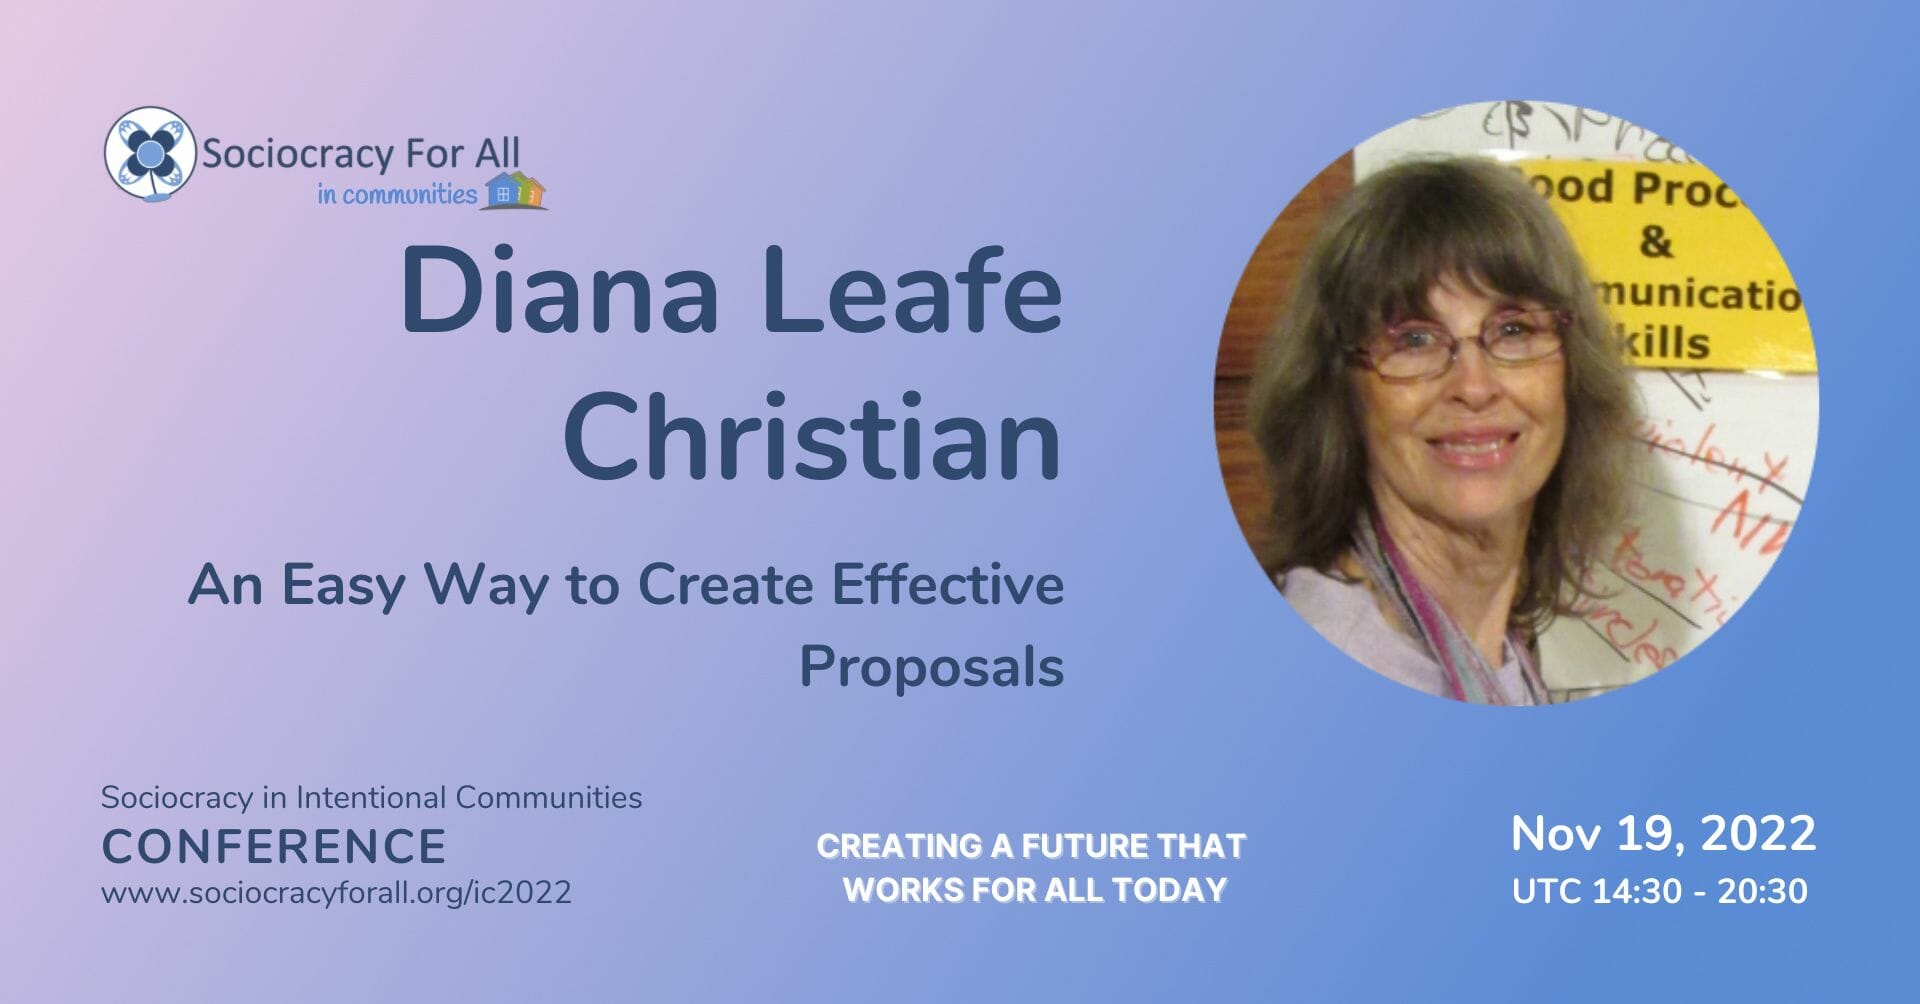 diana leafe christian sociocracy in intentional communities conference 2022 - - Sociocracy For All